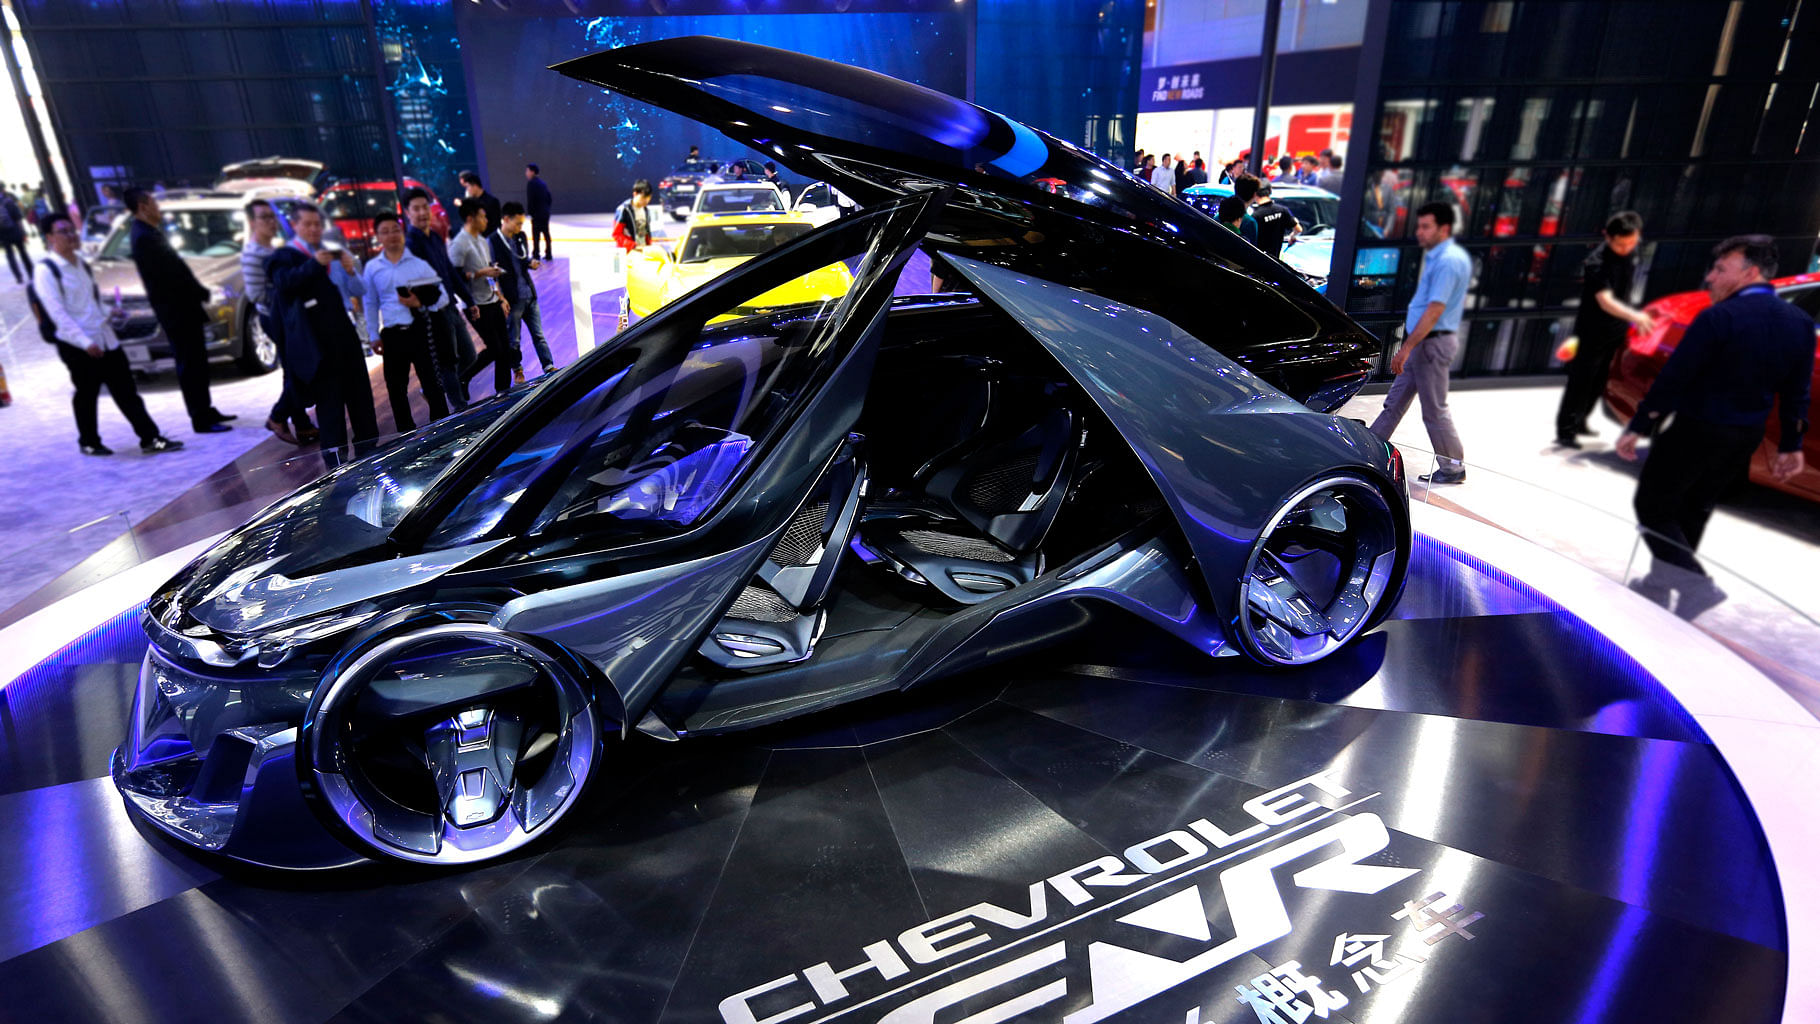 Chevrolet’s concept car at display during the 2016 Beijing Auto Show. (Photo: AP)